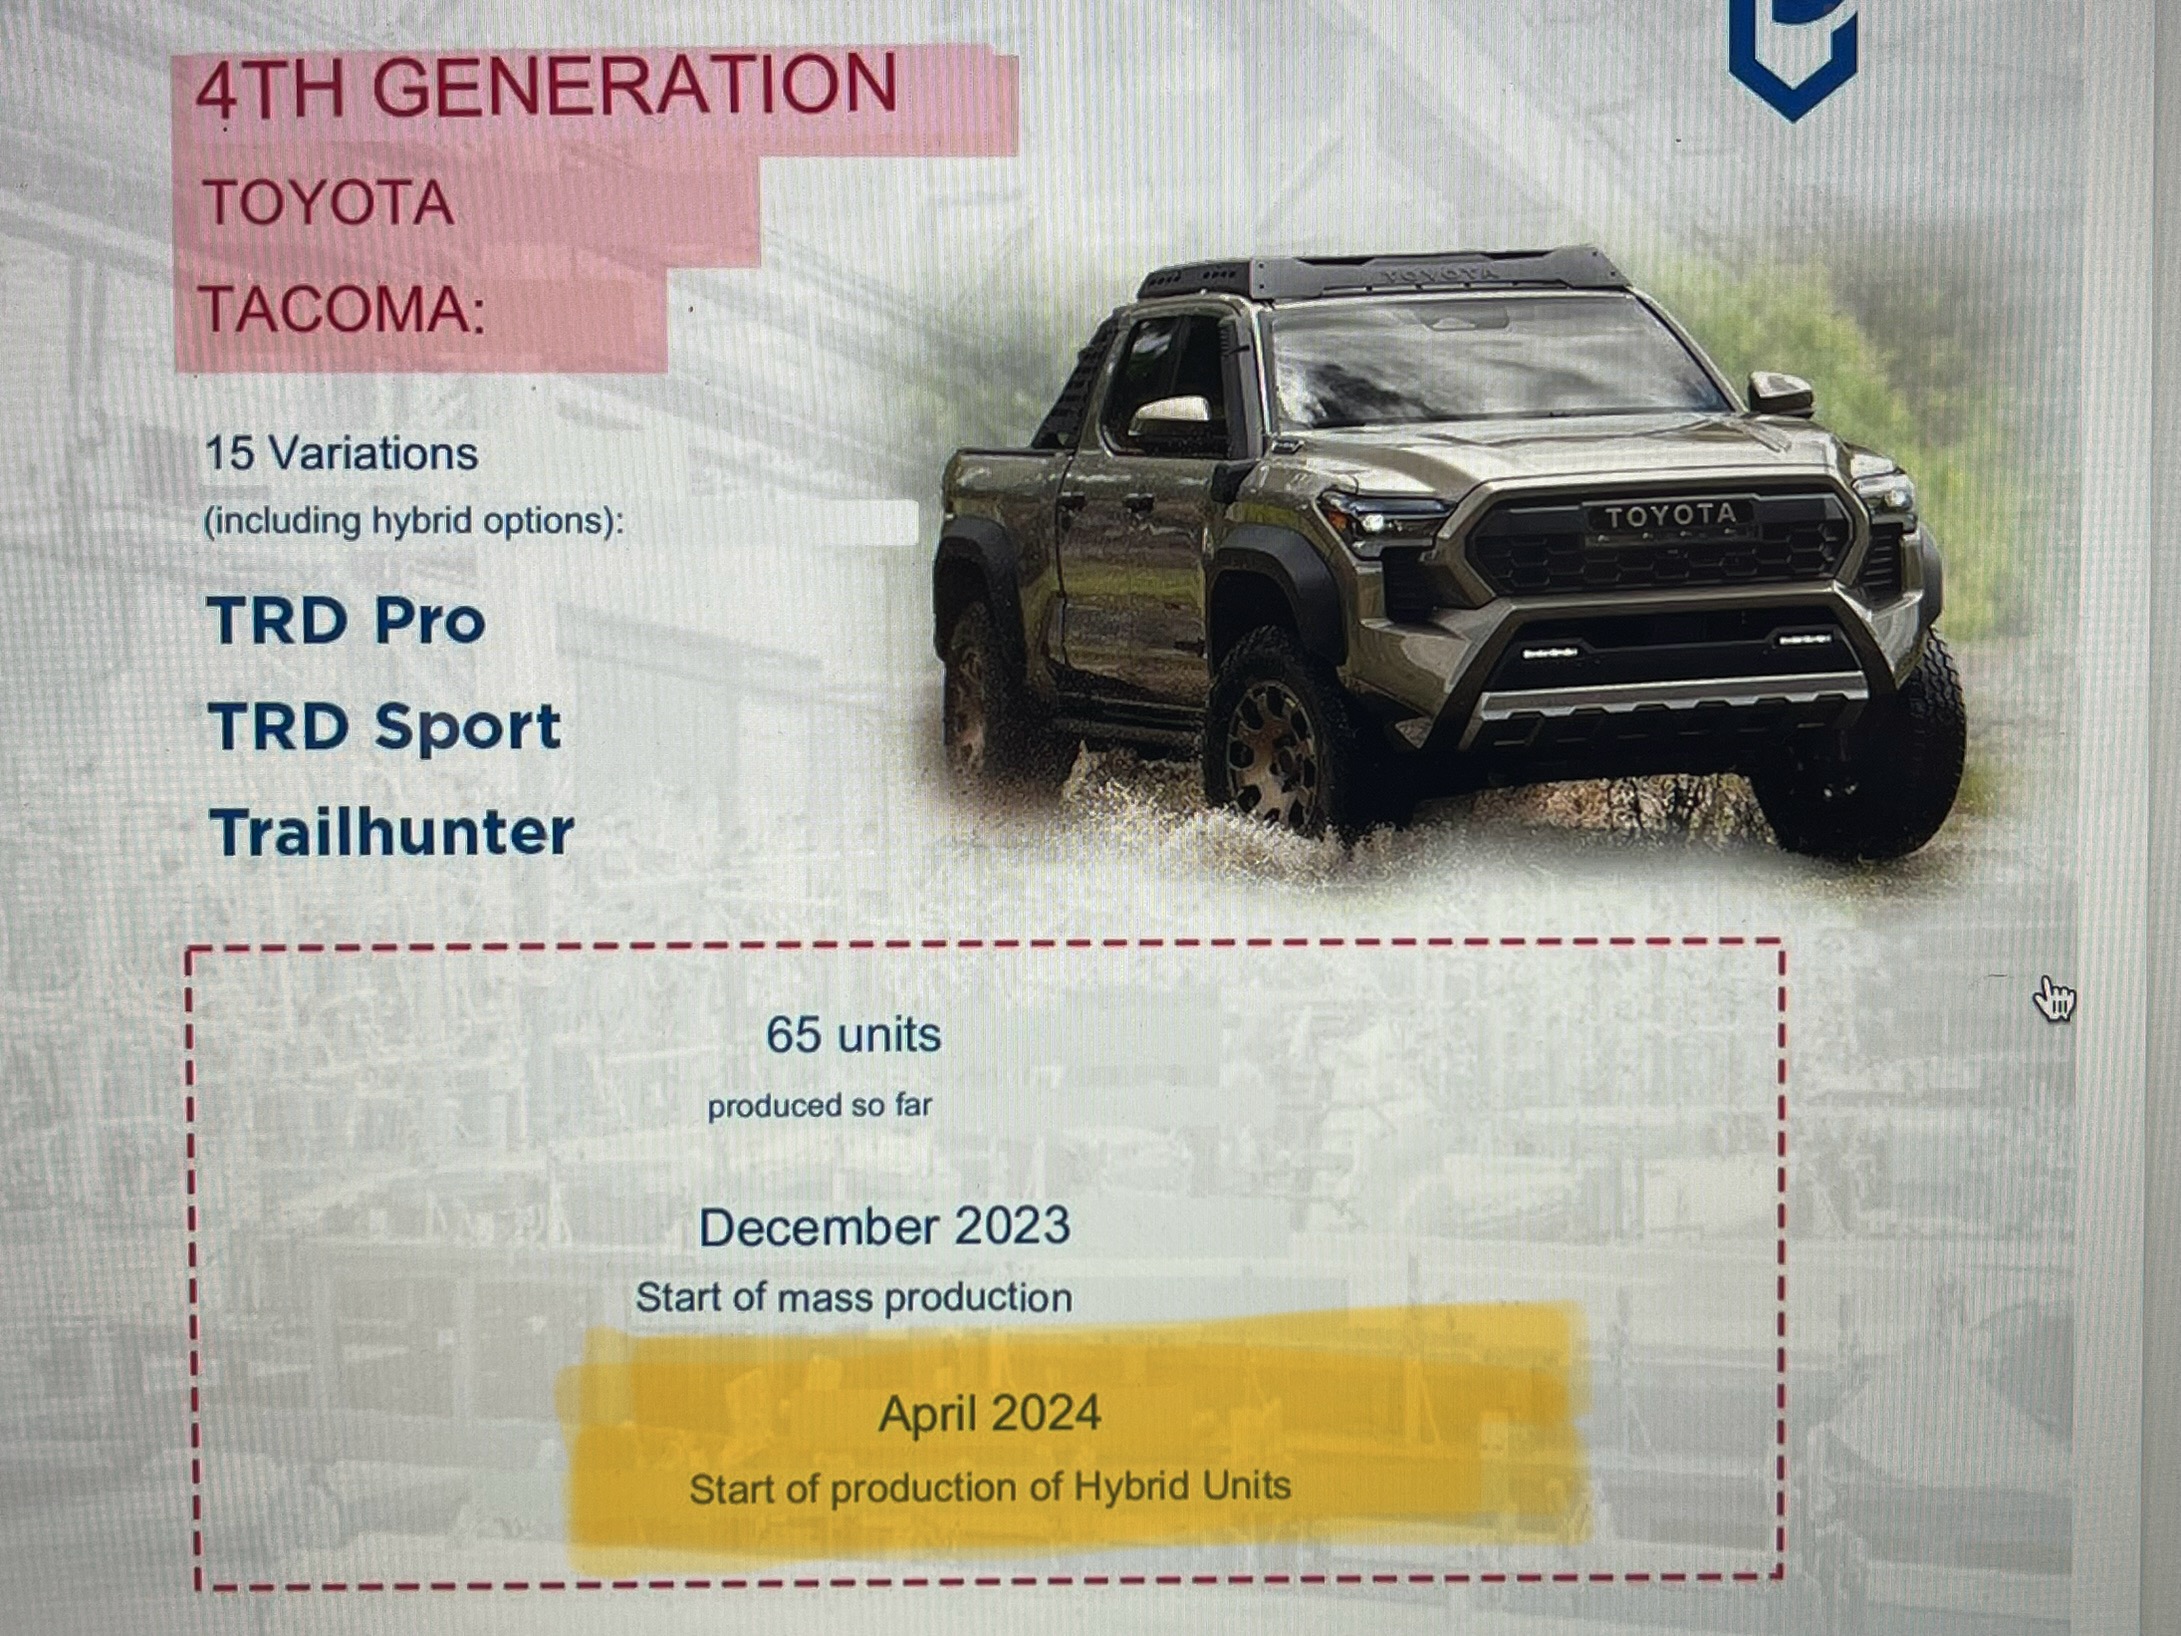 2024 Tacoma Update: Now 109 Allocations for 2024 Tacoma (11/17/23) + December Production Start Tacoma